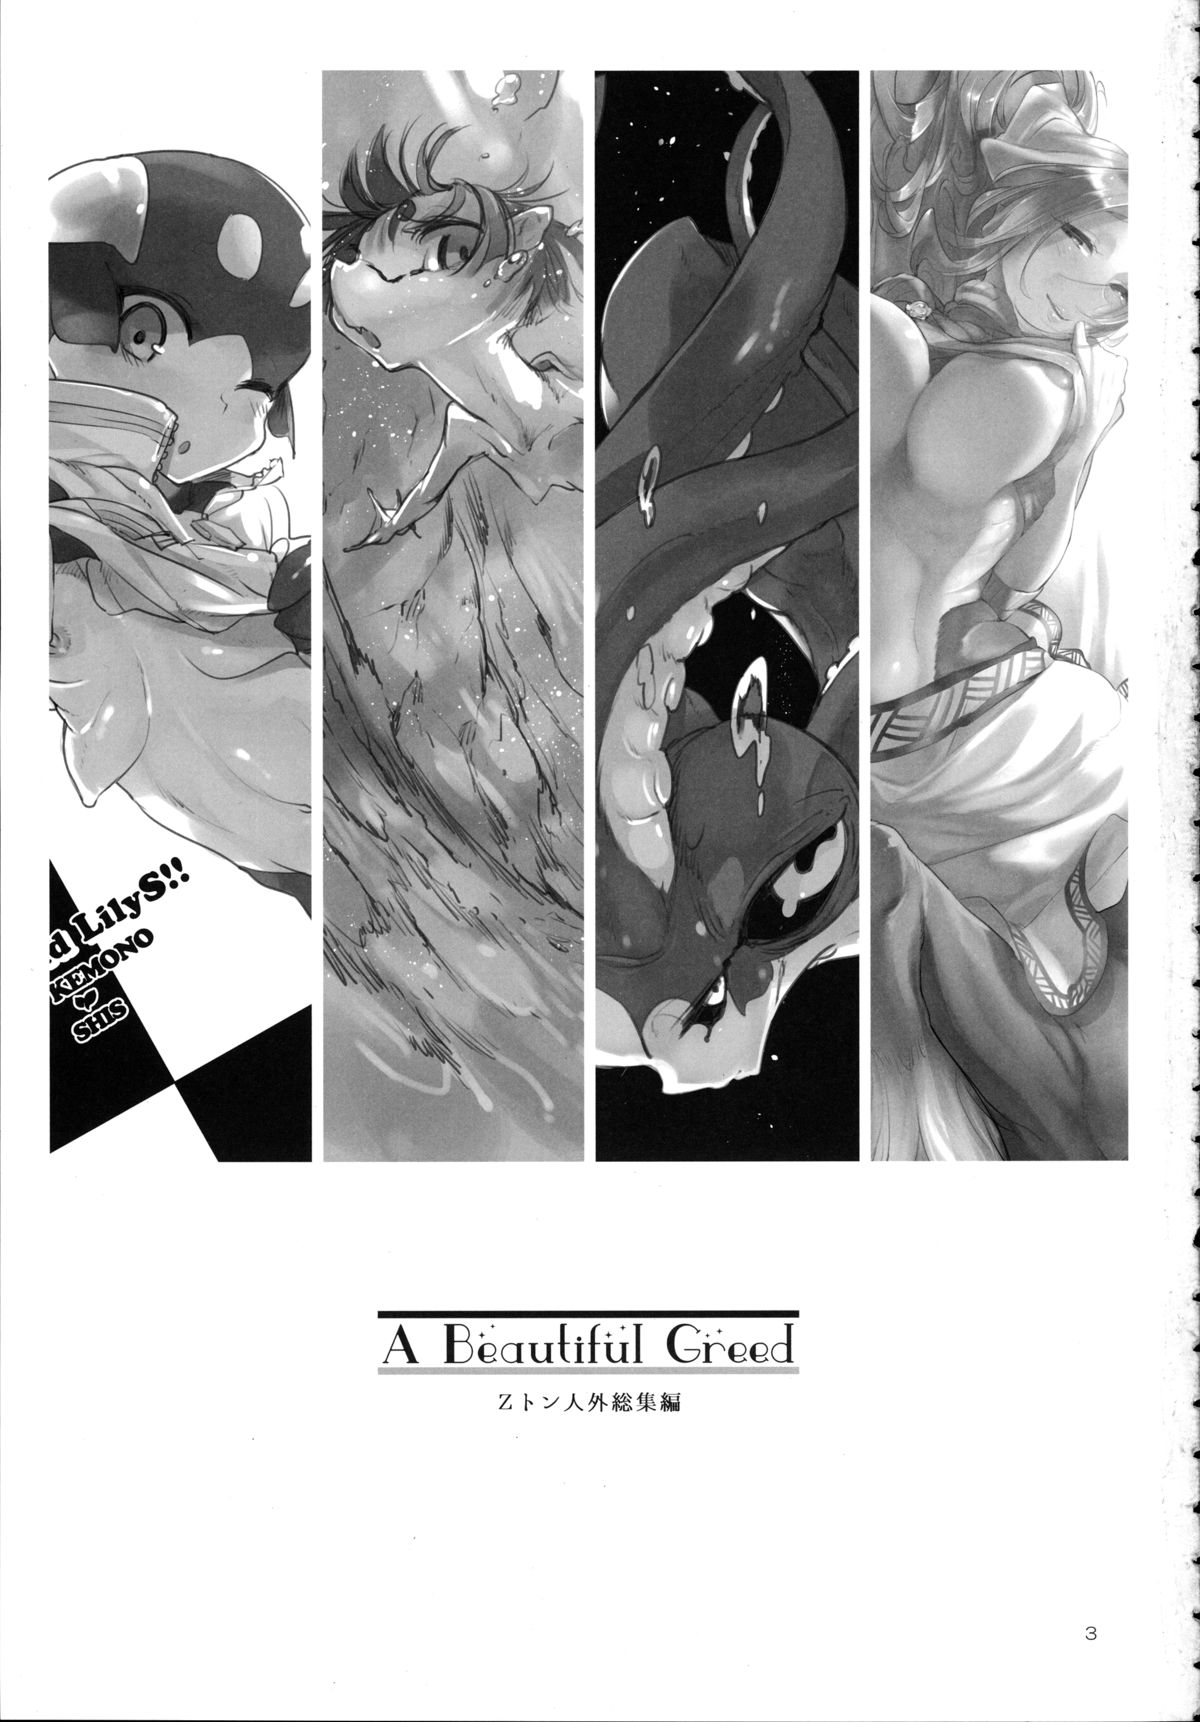 (C89) [SHIS (Zトン)] A Beautiful Greed Zトン人外総集編